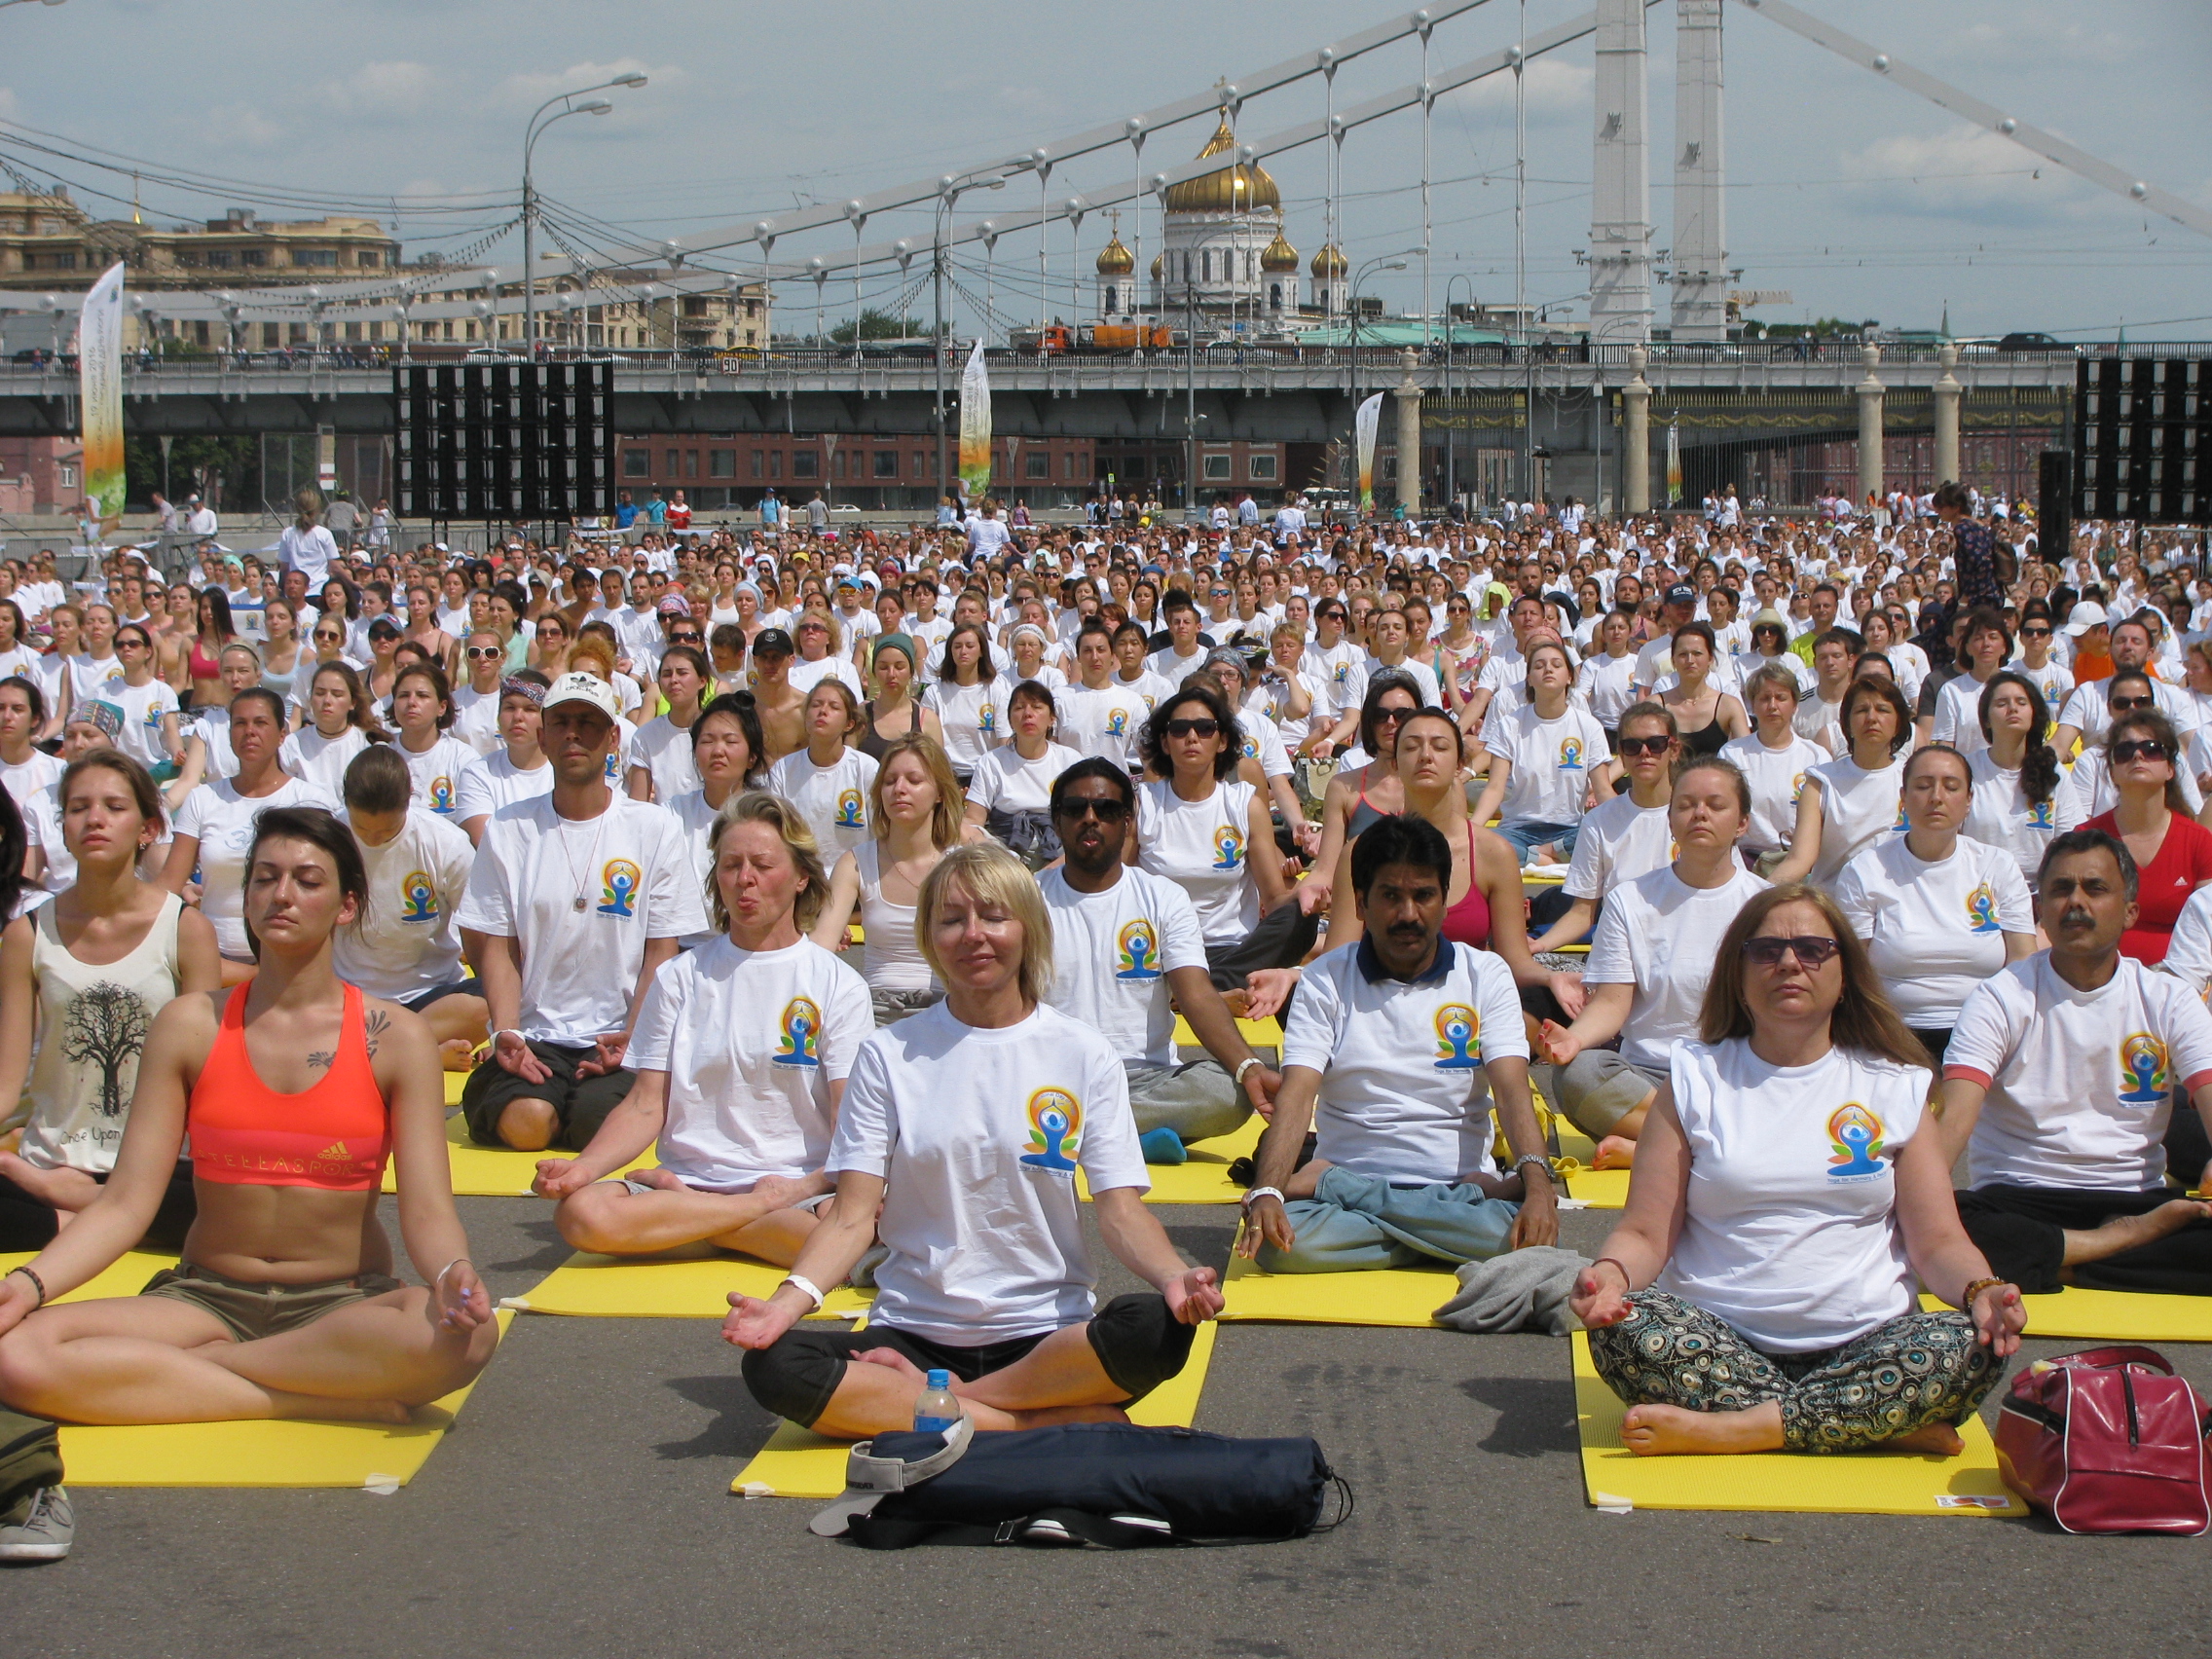 June 21 was declared the official day of yoga in 2014 after an application was lodged to the UN General Assembly to Narendra Modi. At the time his proposal was supported by 170 countries, including Russia. In the Russian Federation, International Yoga Day is celebrated for the second time. This year, large-scale celebrations were organized in Moscow, St. Petersburg, Yekaterinburg, Novosibirsk, Tomsk, and a number of other major Russian cities.